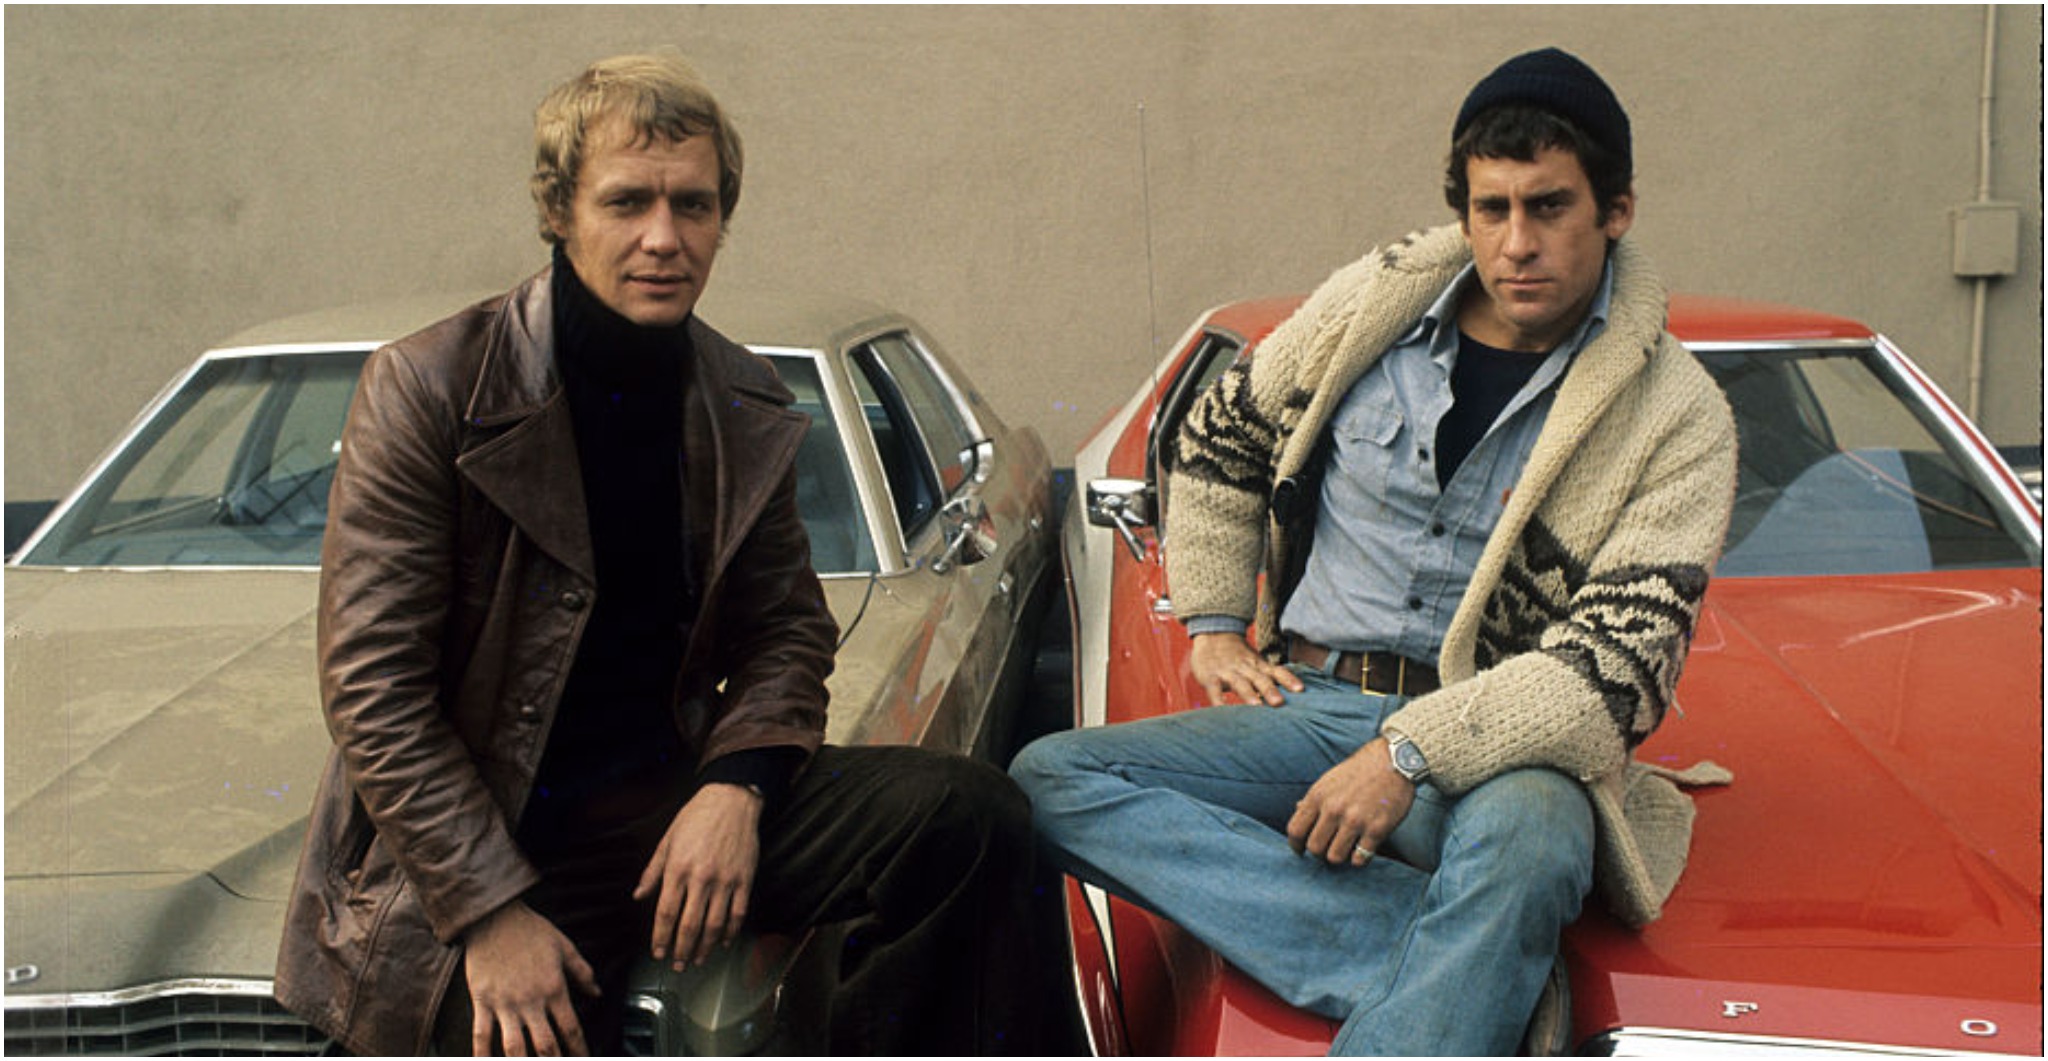 David Soul and Paul Michael Glaser as Starsky and Hutch.  (Photo by Walt Disney Television via Getty Images Photo Archives/Walt Disney Television via Getty Images)